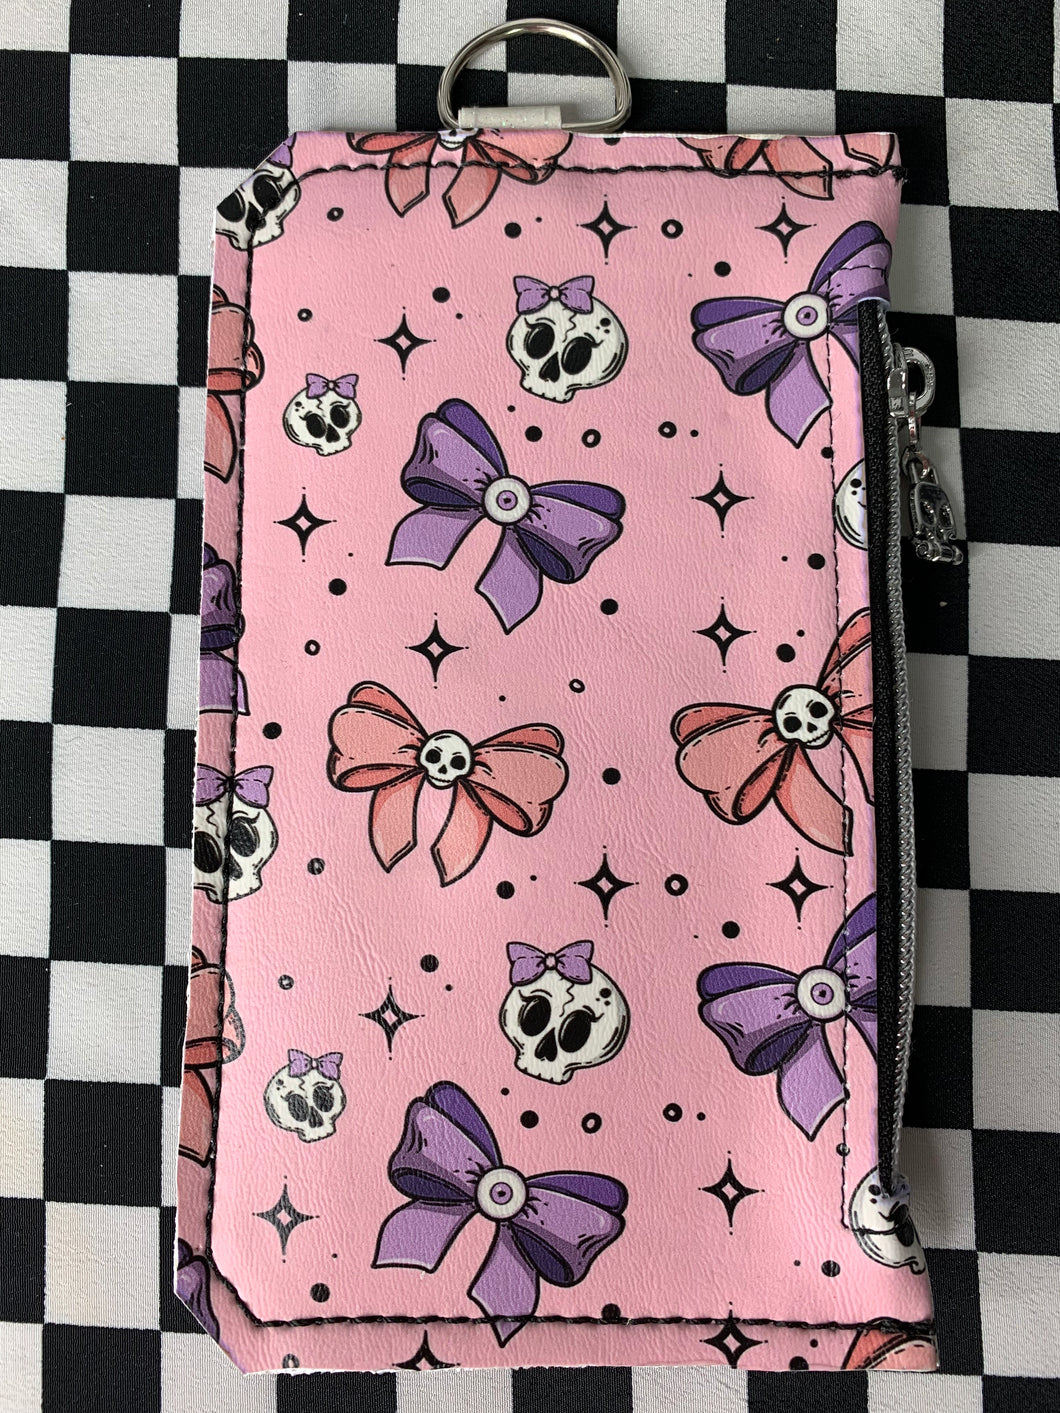 Pink skulls and bows fan art card and phone wallet